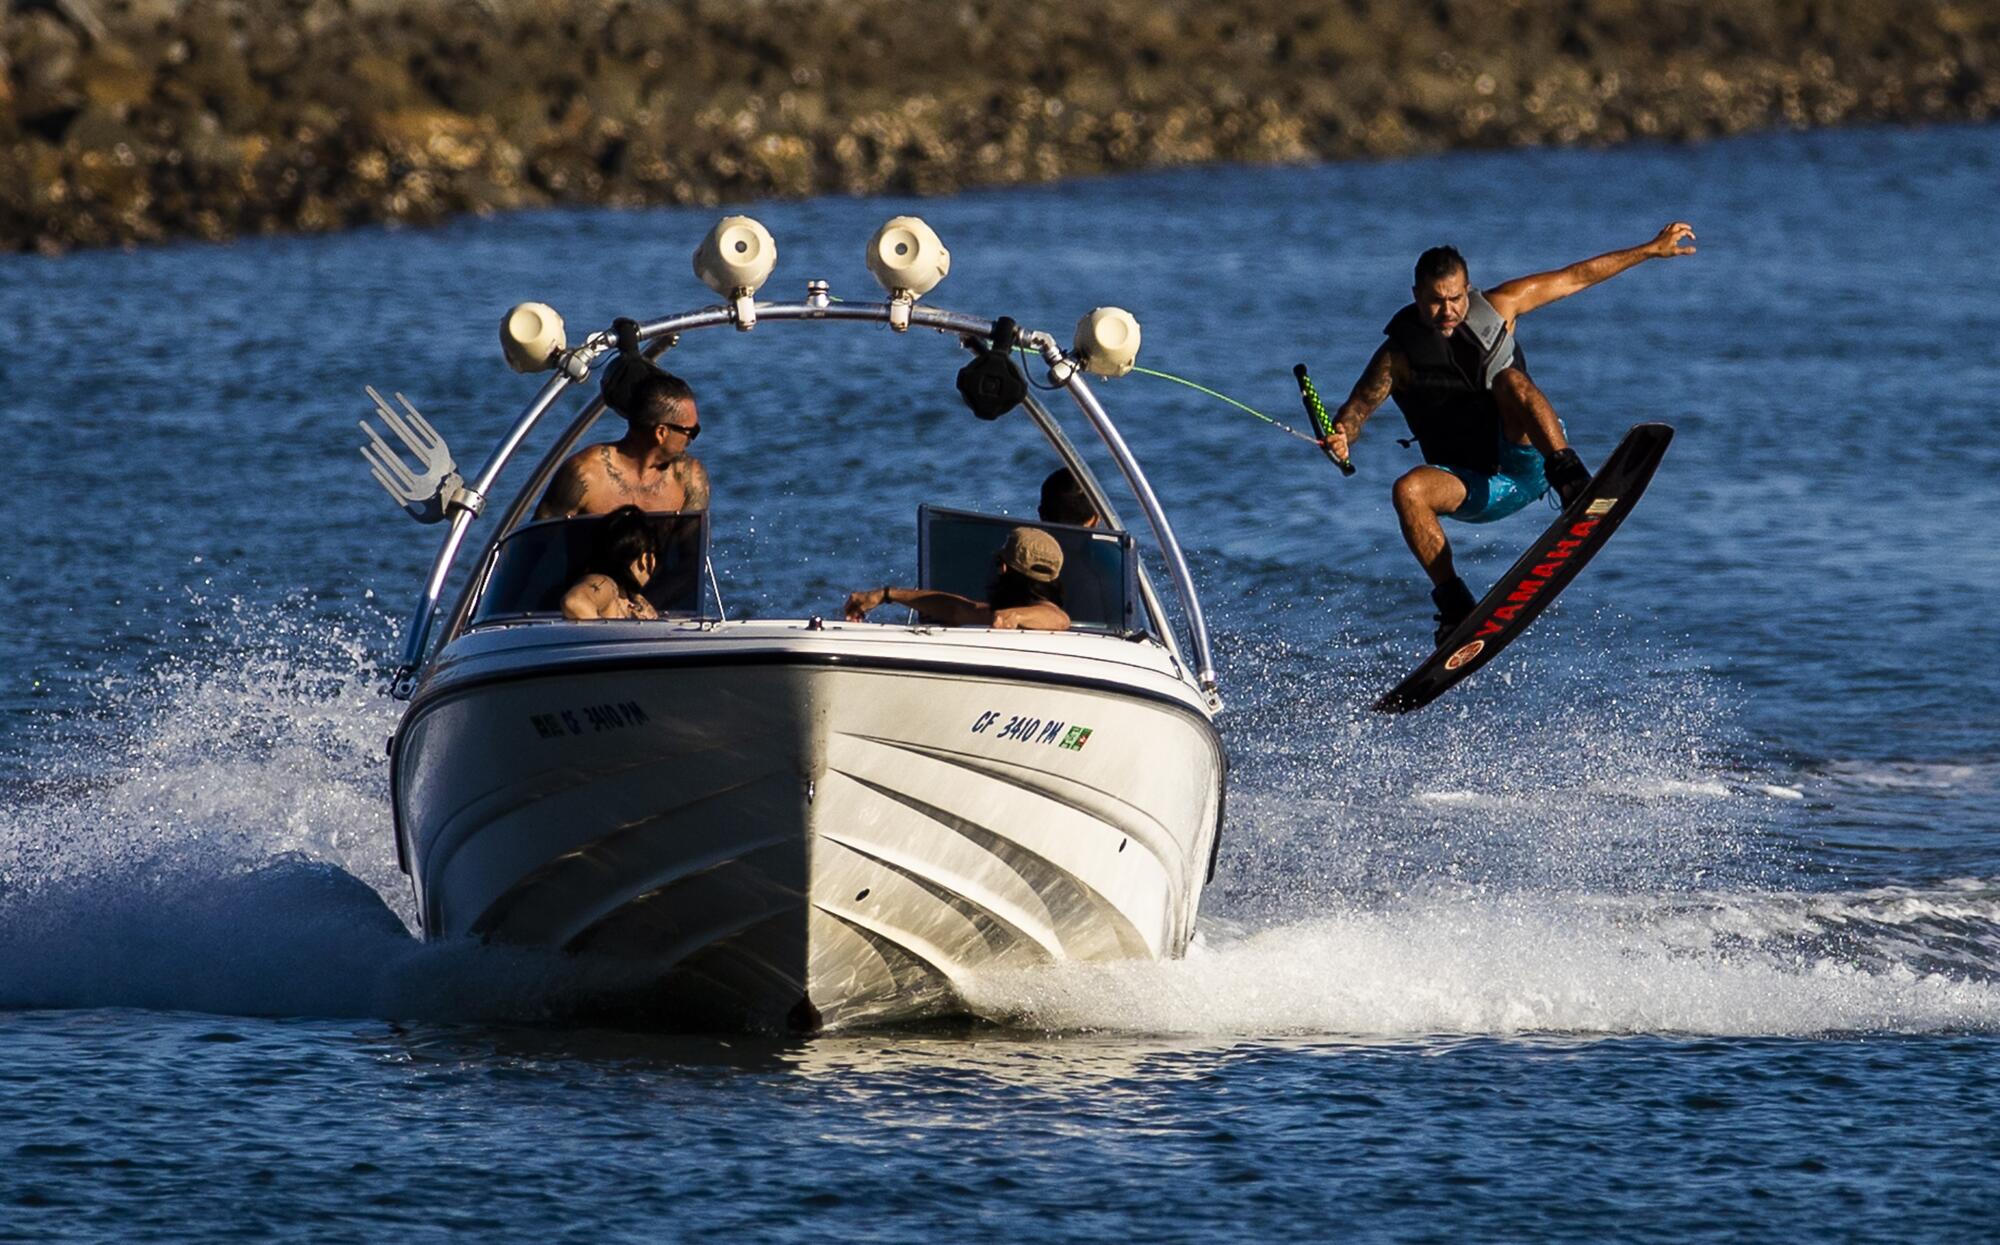 A wakeboarder gets air while being pulled behind a boat at Marine Stadium in Alamitos Bay, Long Beach.